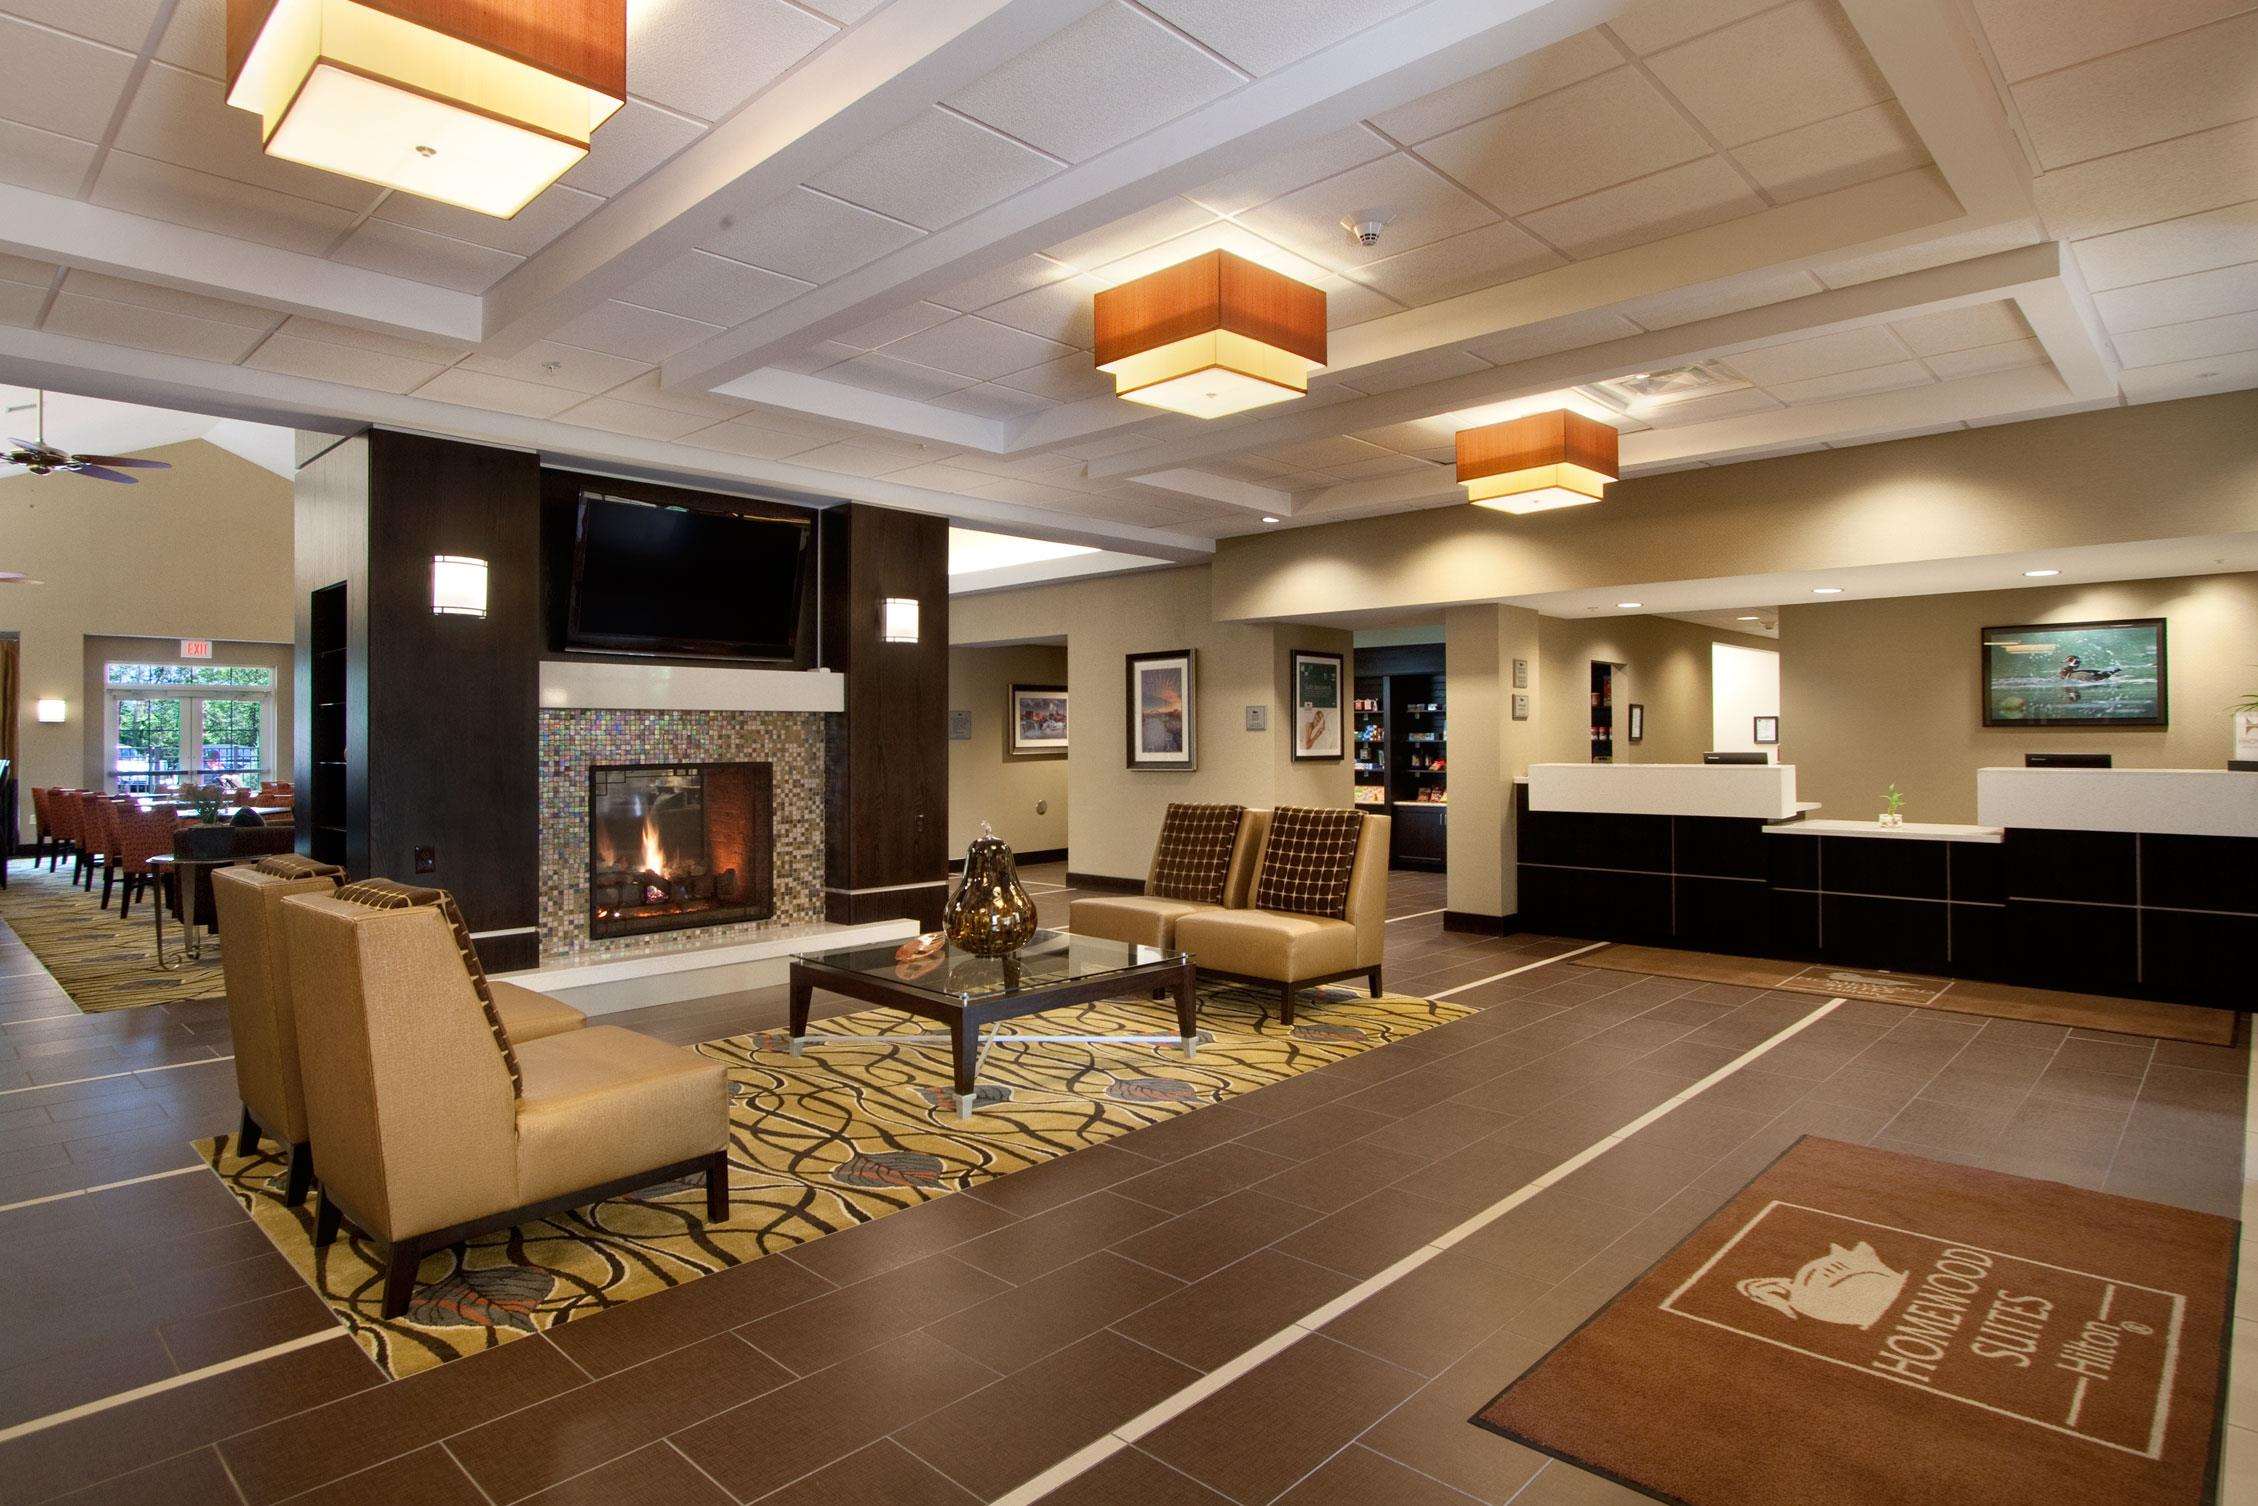 Homewood Suites by Hilton Rochester/Greece, NY Photo